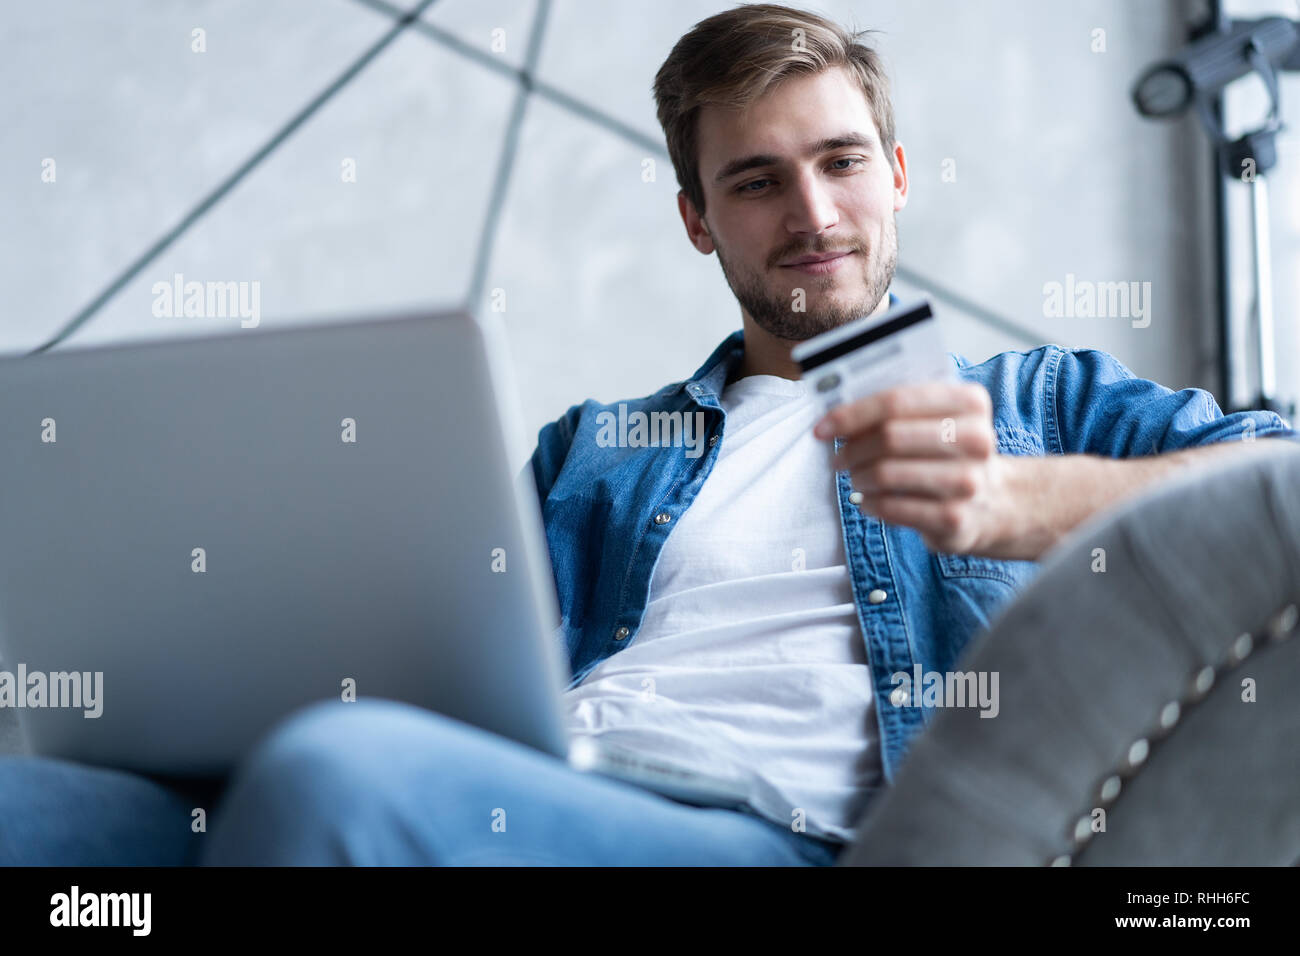 technology, shopping, banking, home and lifestyle concept - close up of man with laptop computer and credit card at home. Stock Photo